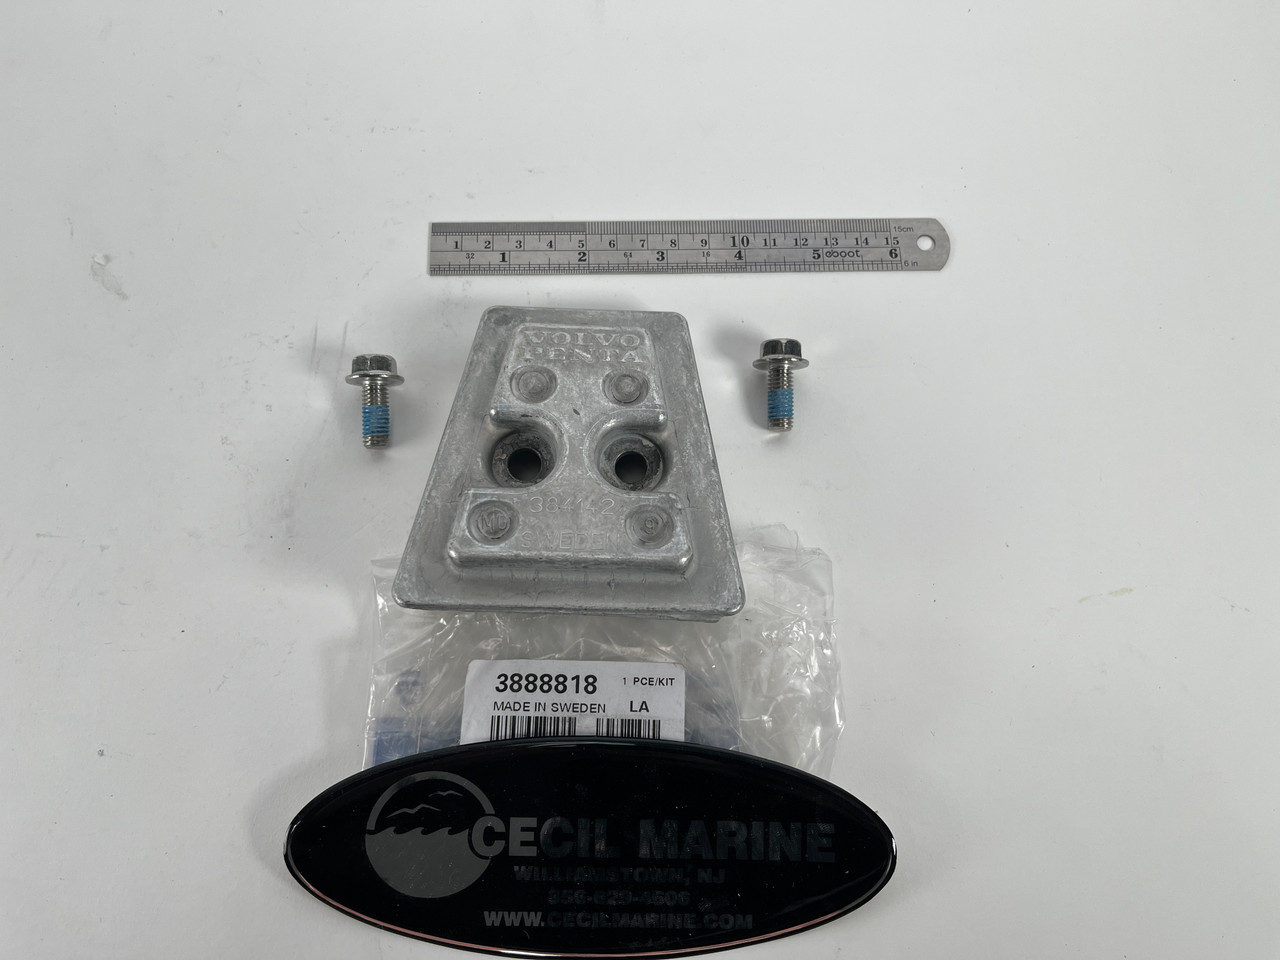 $49.99* GENUINE VOLVO no tax* FRESH WATER MAGNESIUM ANODE KIT 3888818 *In Stock & Ready To Ship!